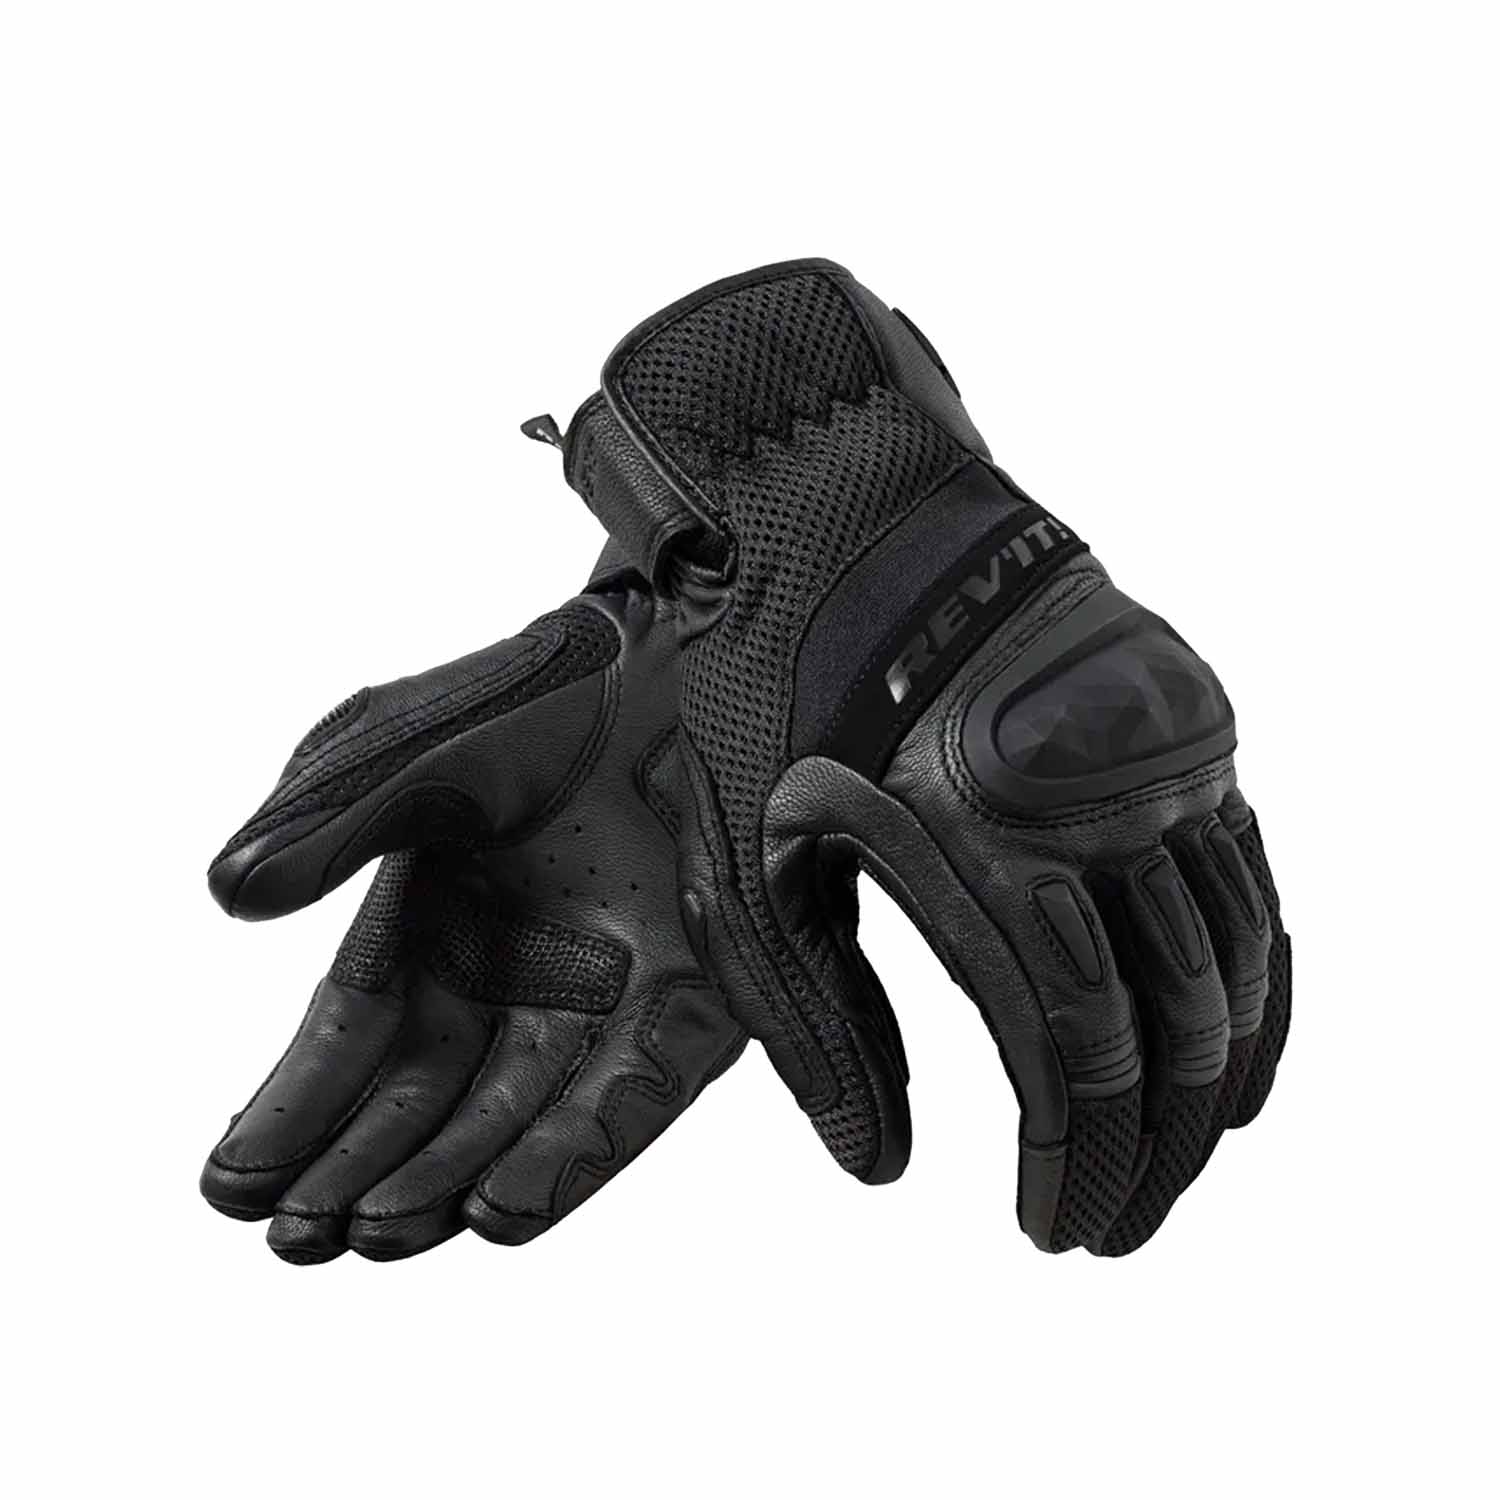 Image of REV'IT! Dirt 4 Gloves Black Size S ID 8700001383387